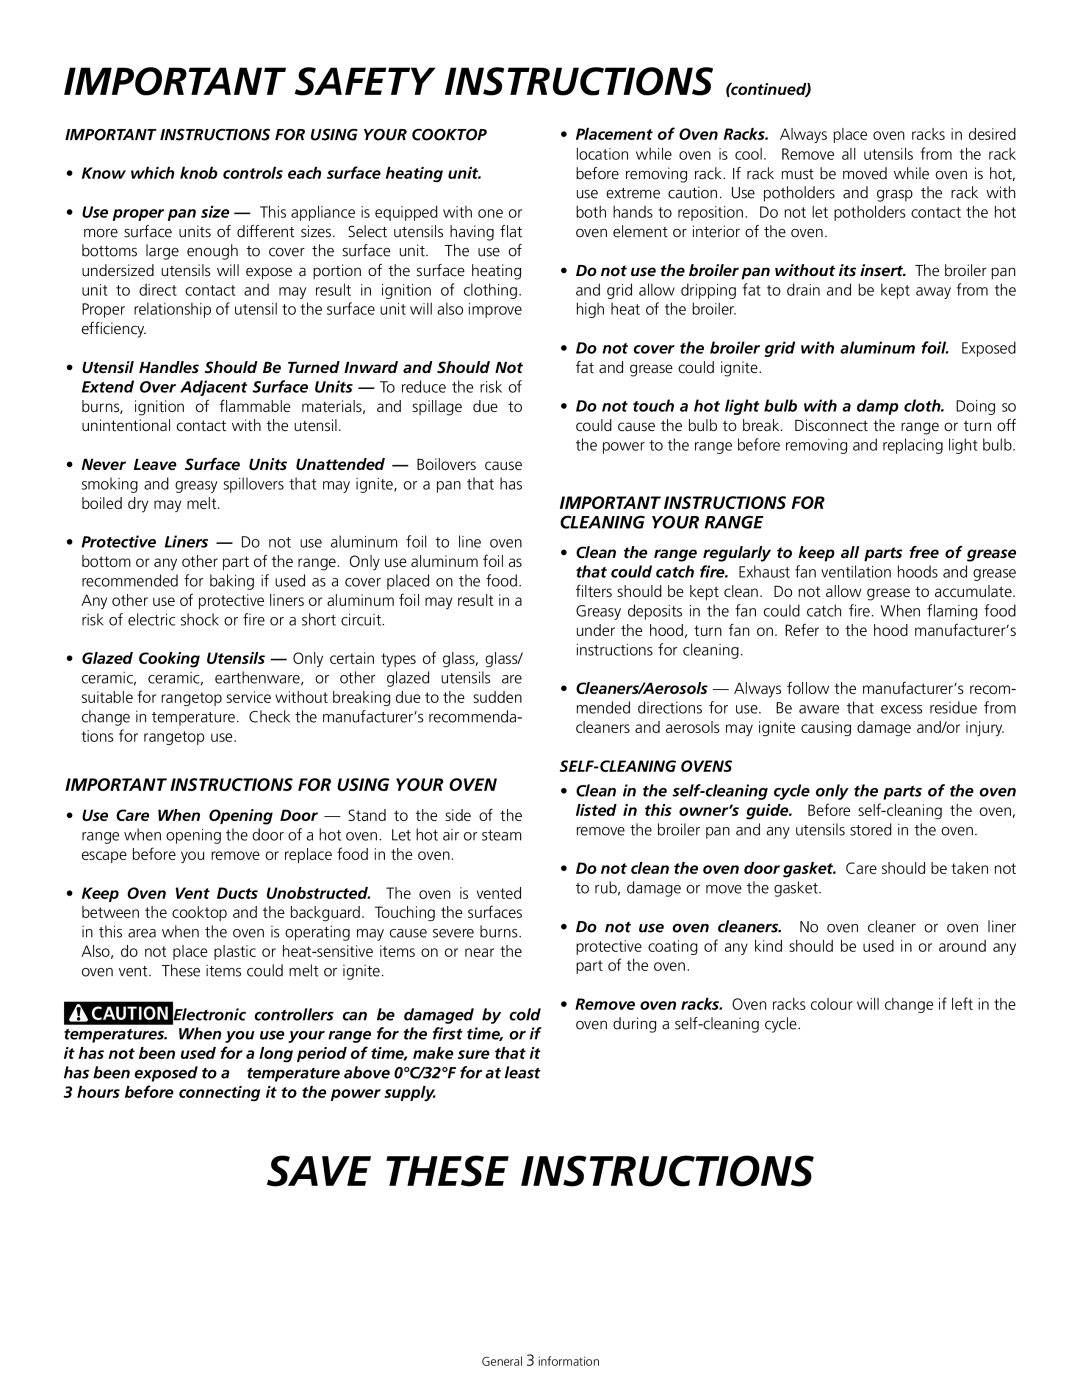 Tappan 318200505 manual Save These Instructions, Important Instructions For Cleaning Your Range, Self-Cleaningovens 